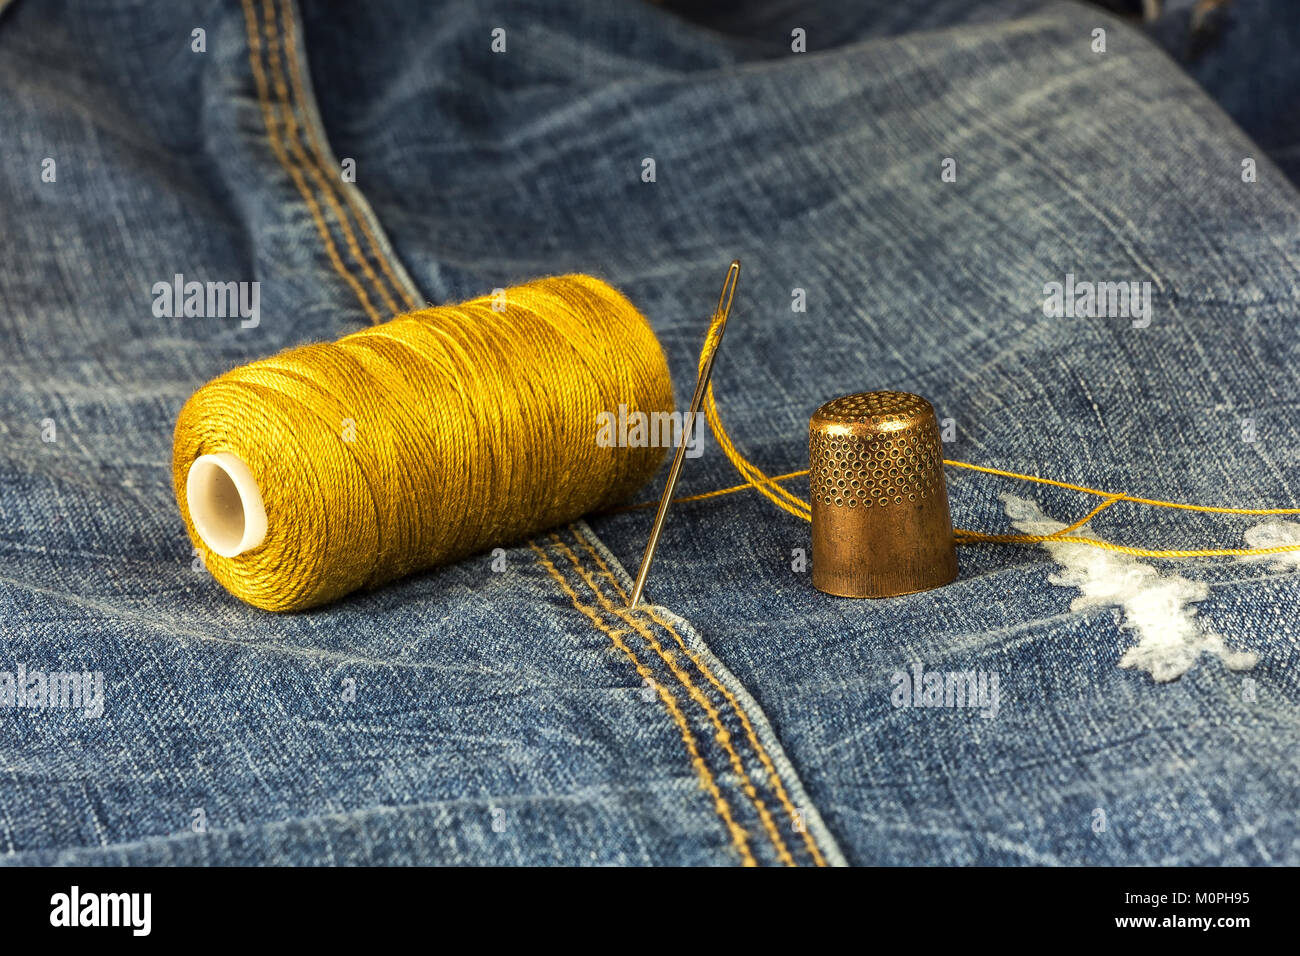 On denim is a spool of thread, needle and thimble Stock Photo